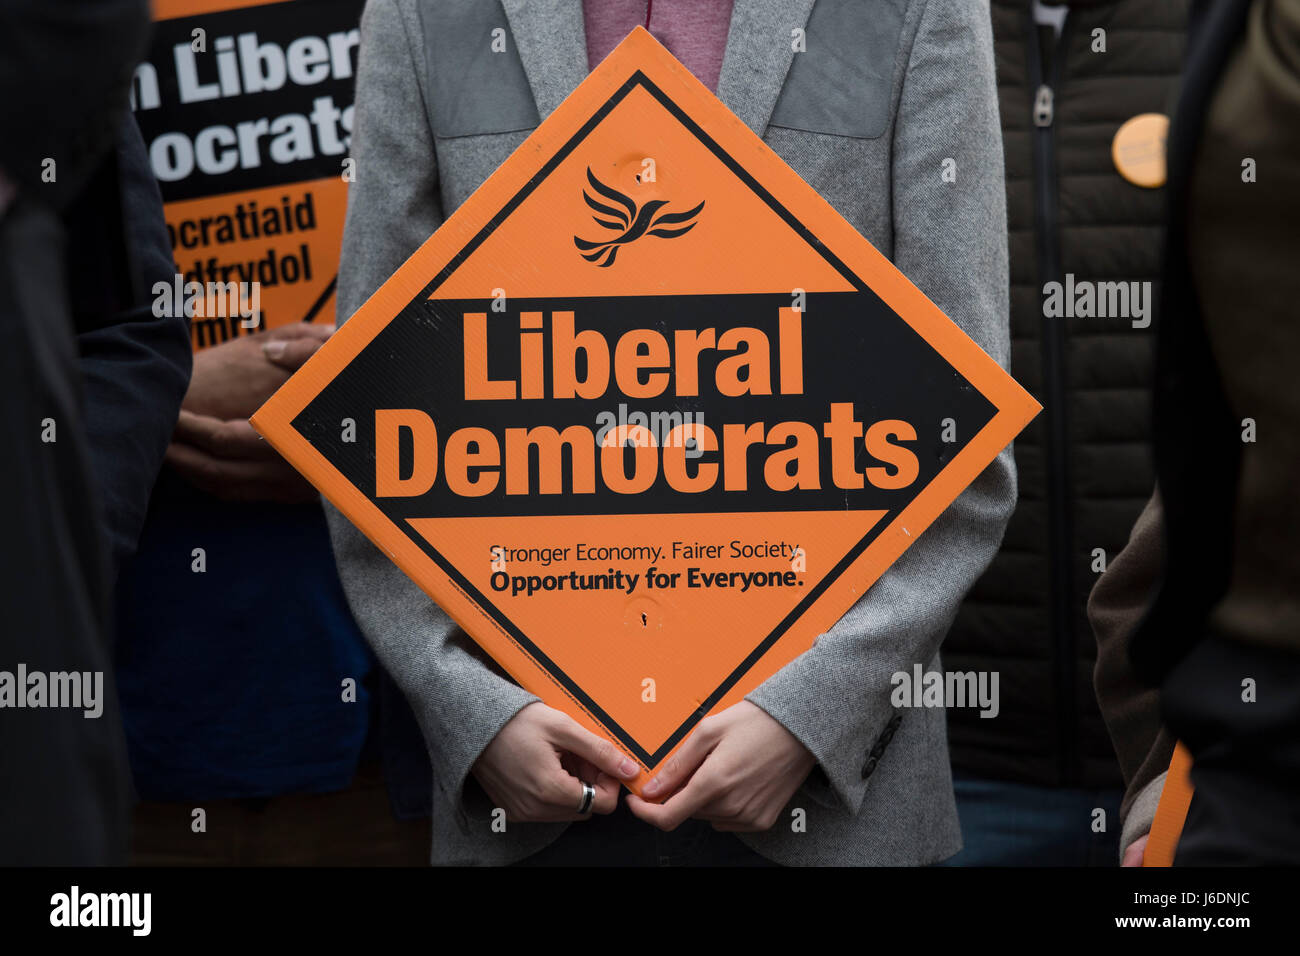 Liberal democrat placard showing the Lib Dem sign logo during a campaigning event. Stock Photo